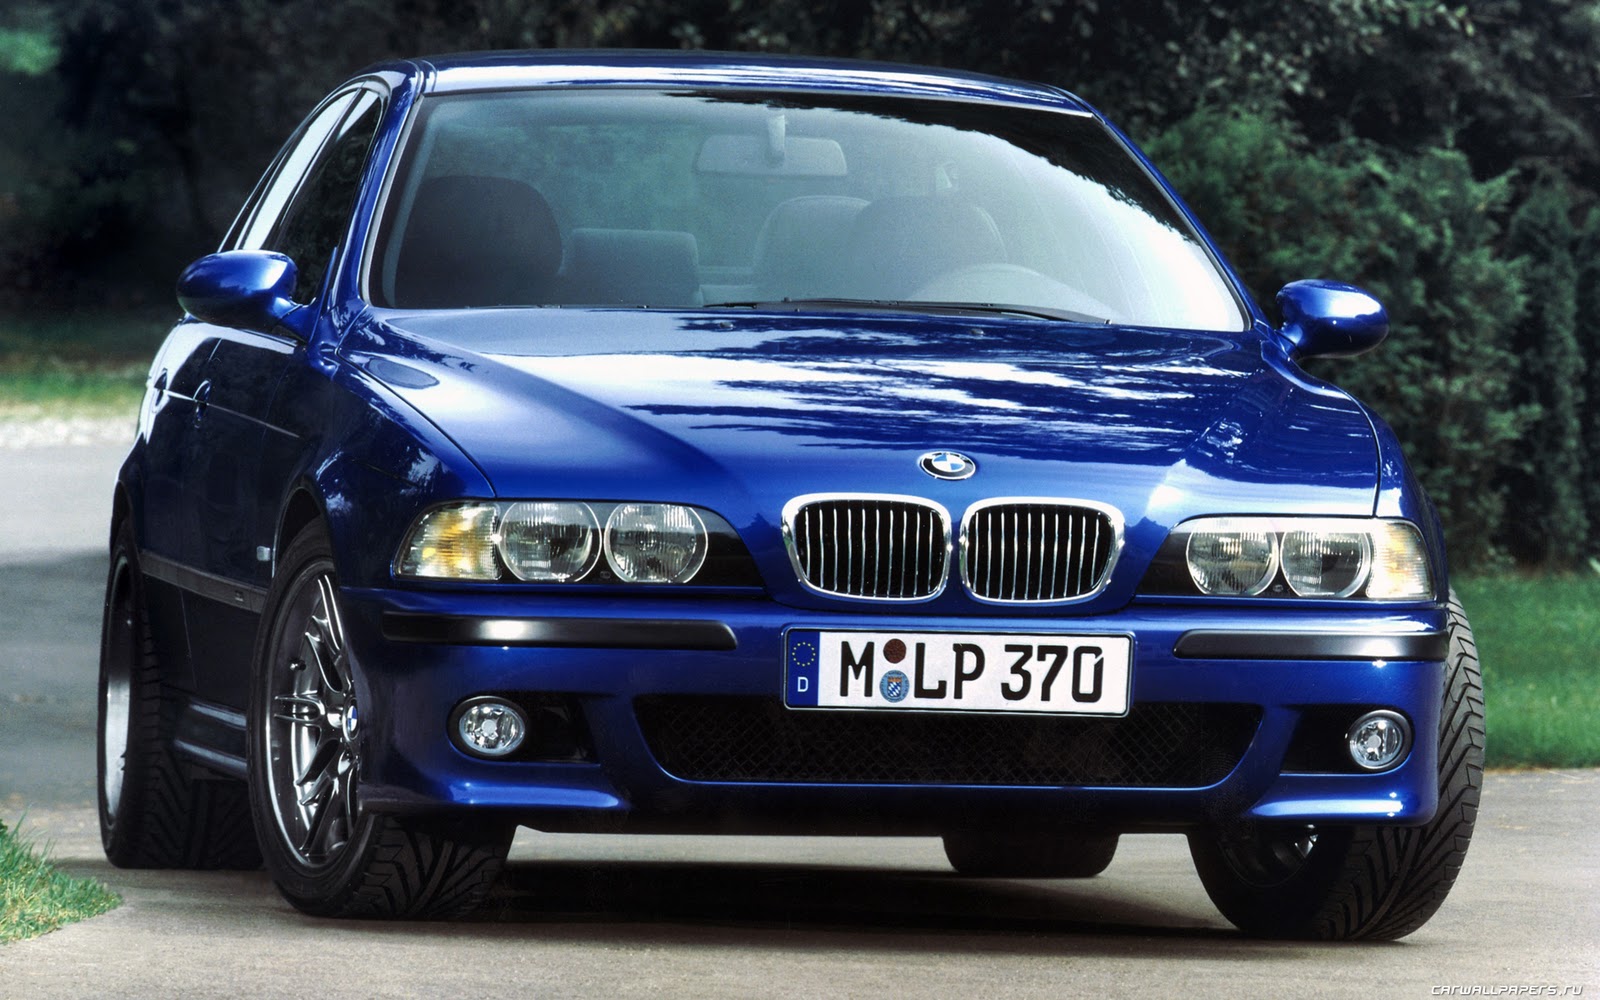 The BMW M5 Sedan Wallpapers for PC ~ BMW Automobiles